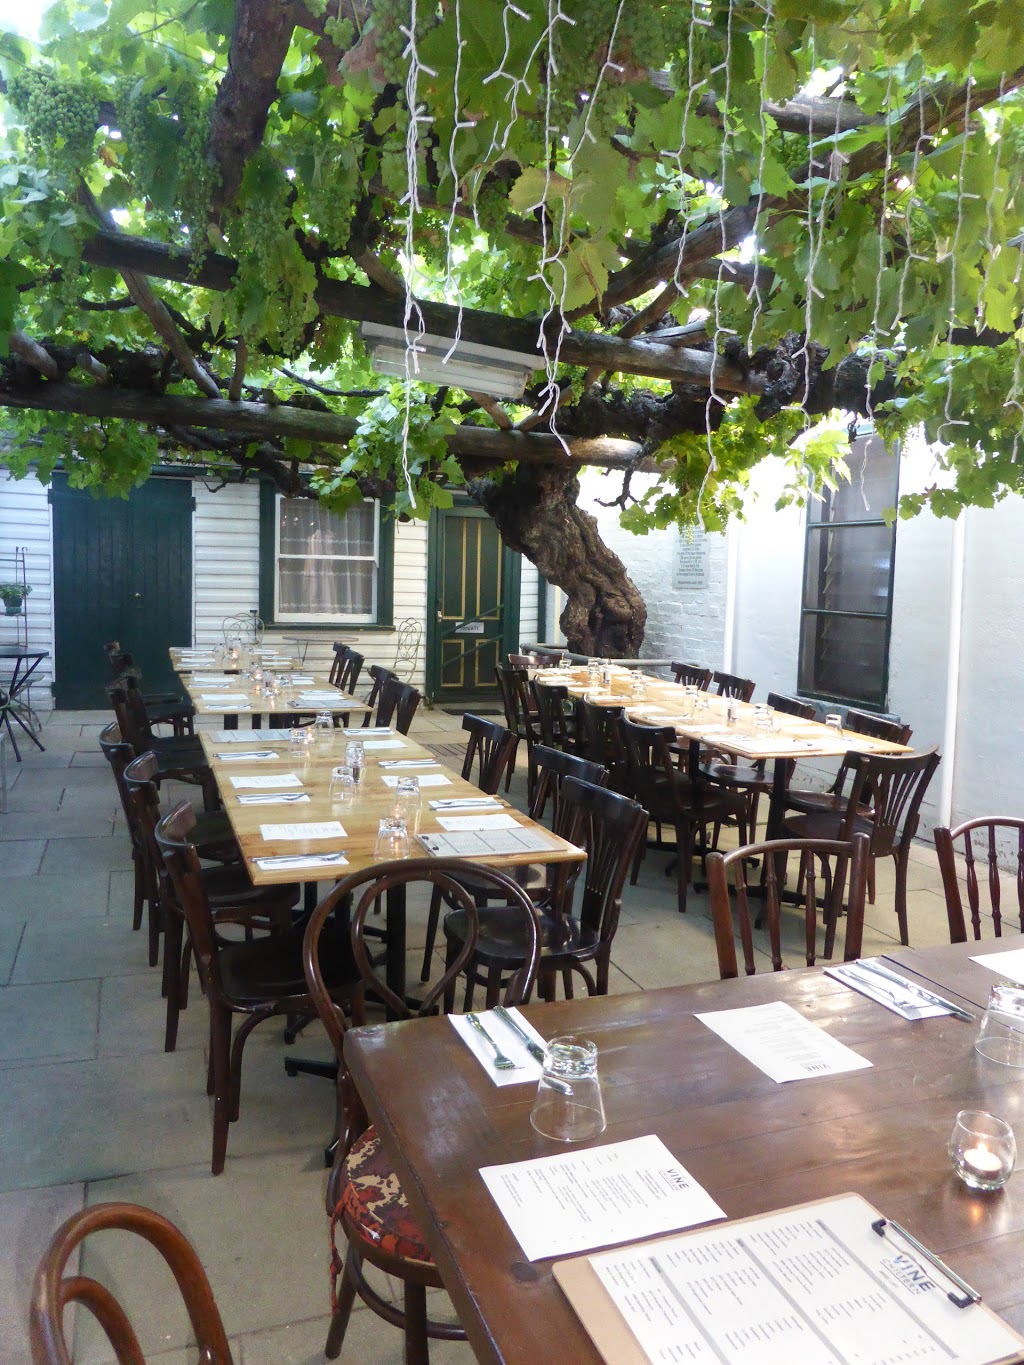 The Vine Chiltern | cafe | 53 Conness St, Chiltern VIC 3683, Australia | 0475044866 OR +61 475 044 866